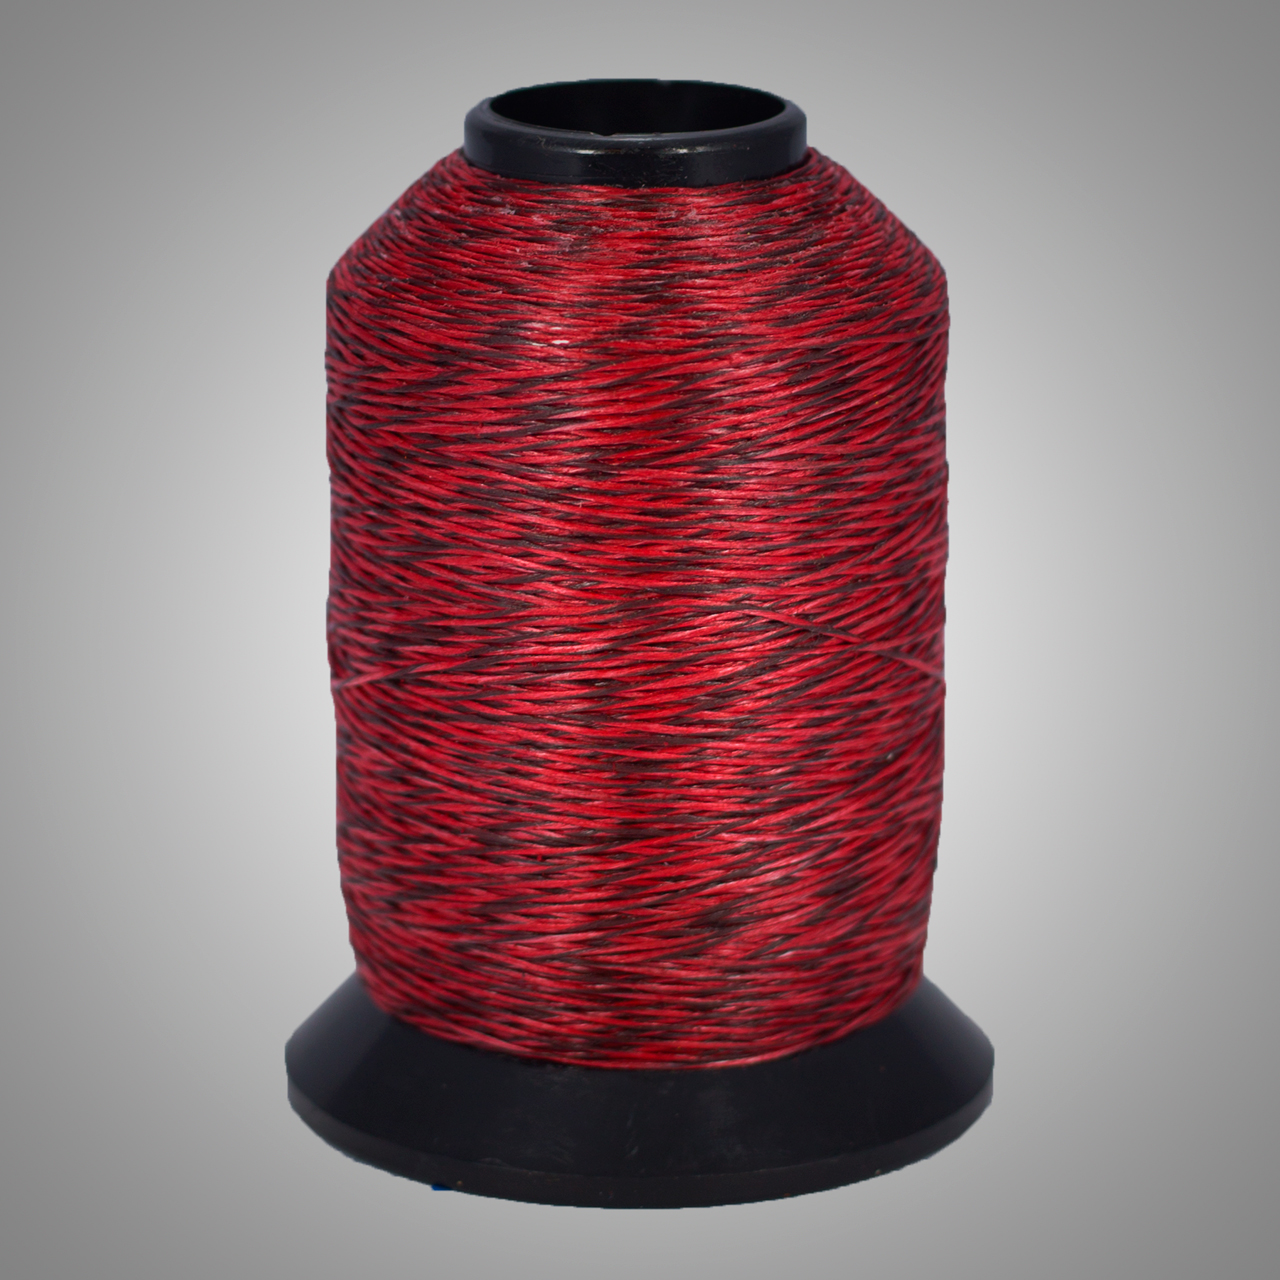 Red and black bow string by 60X Custom Bow Strings